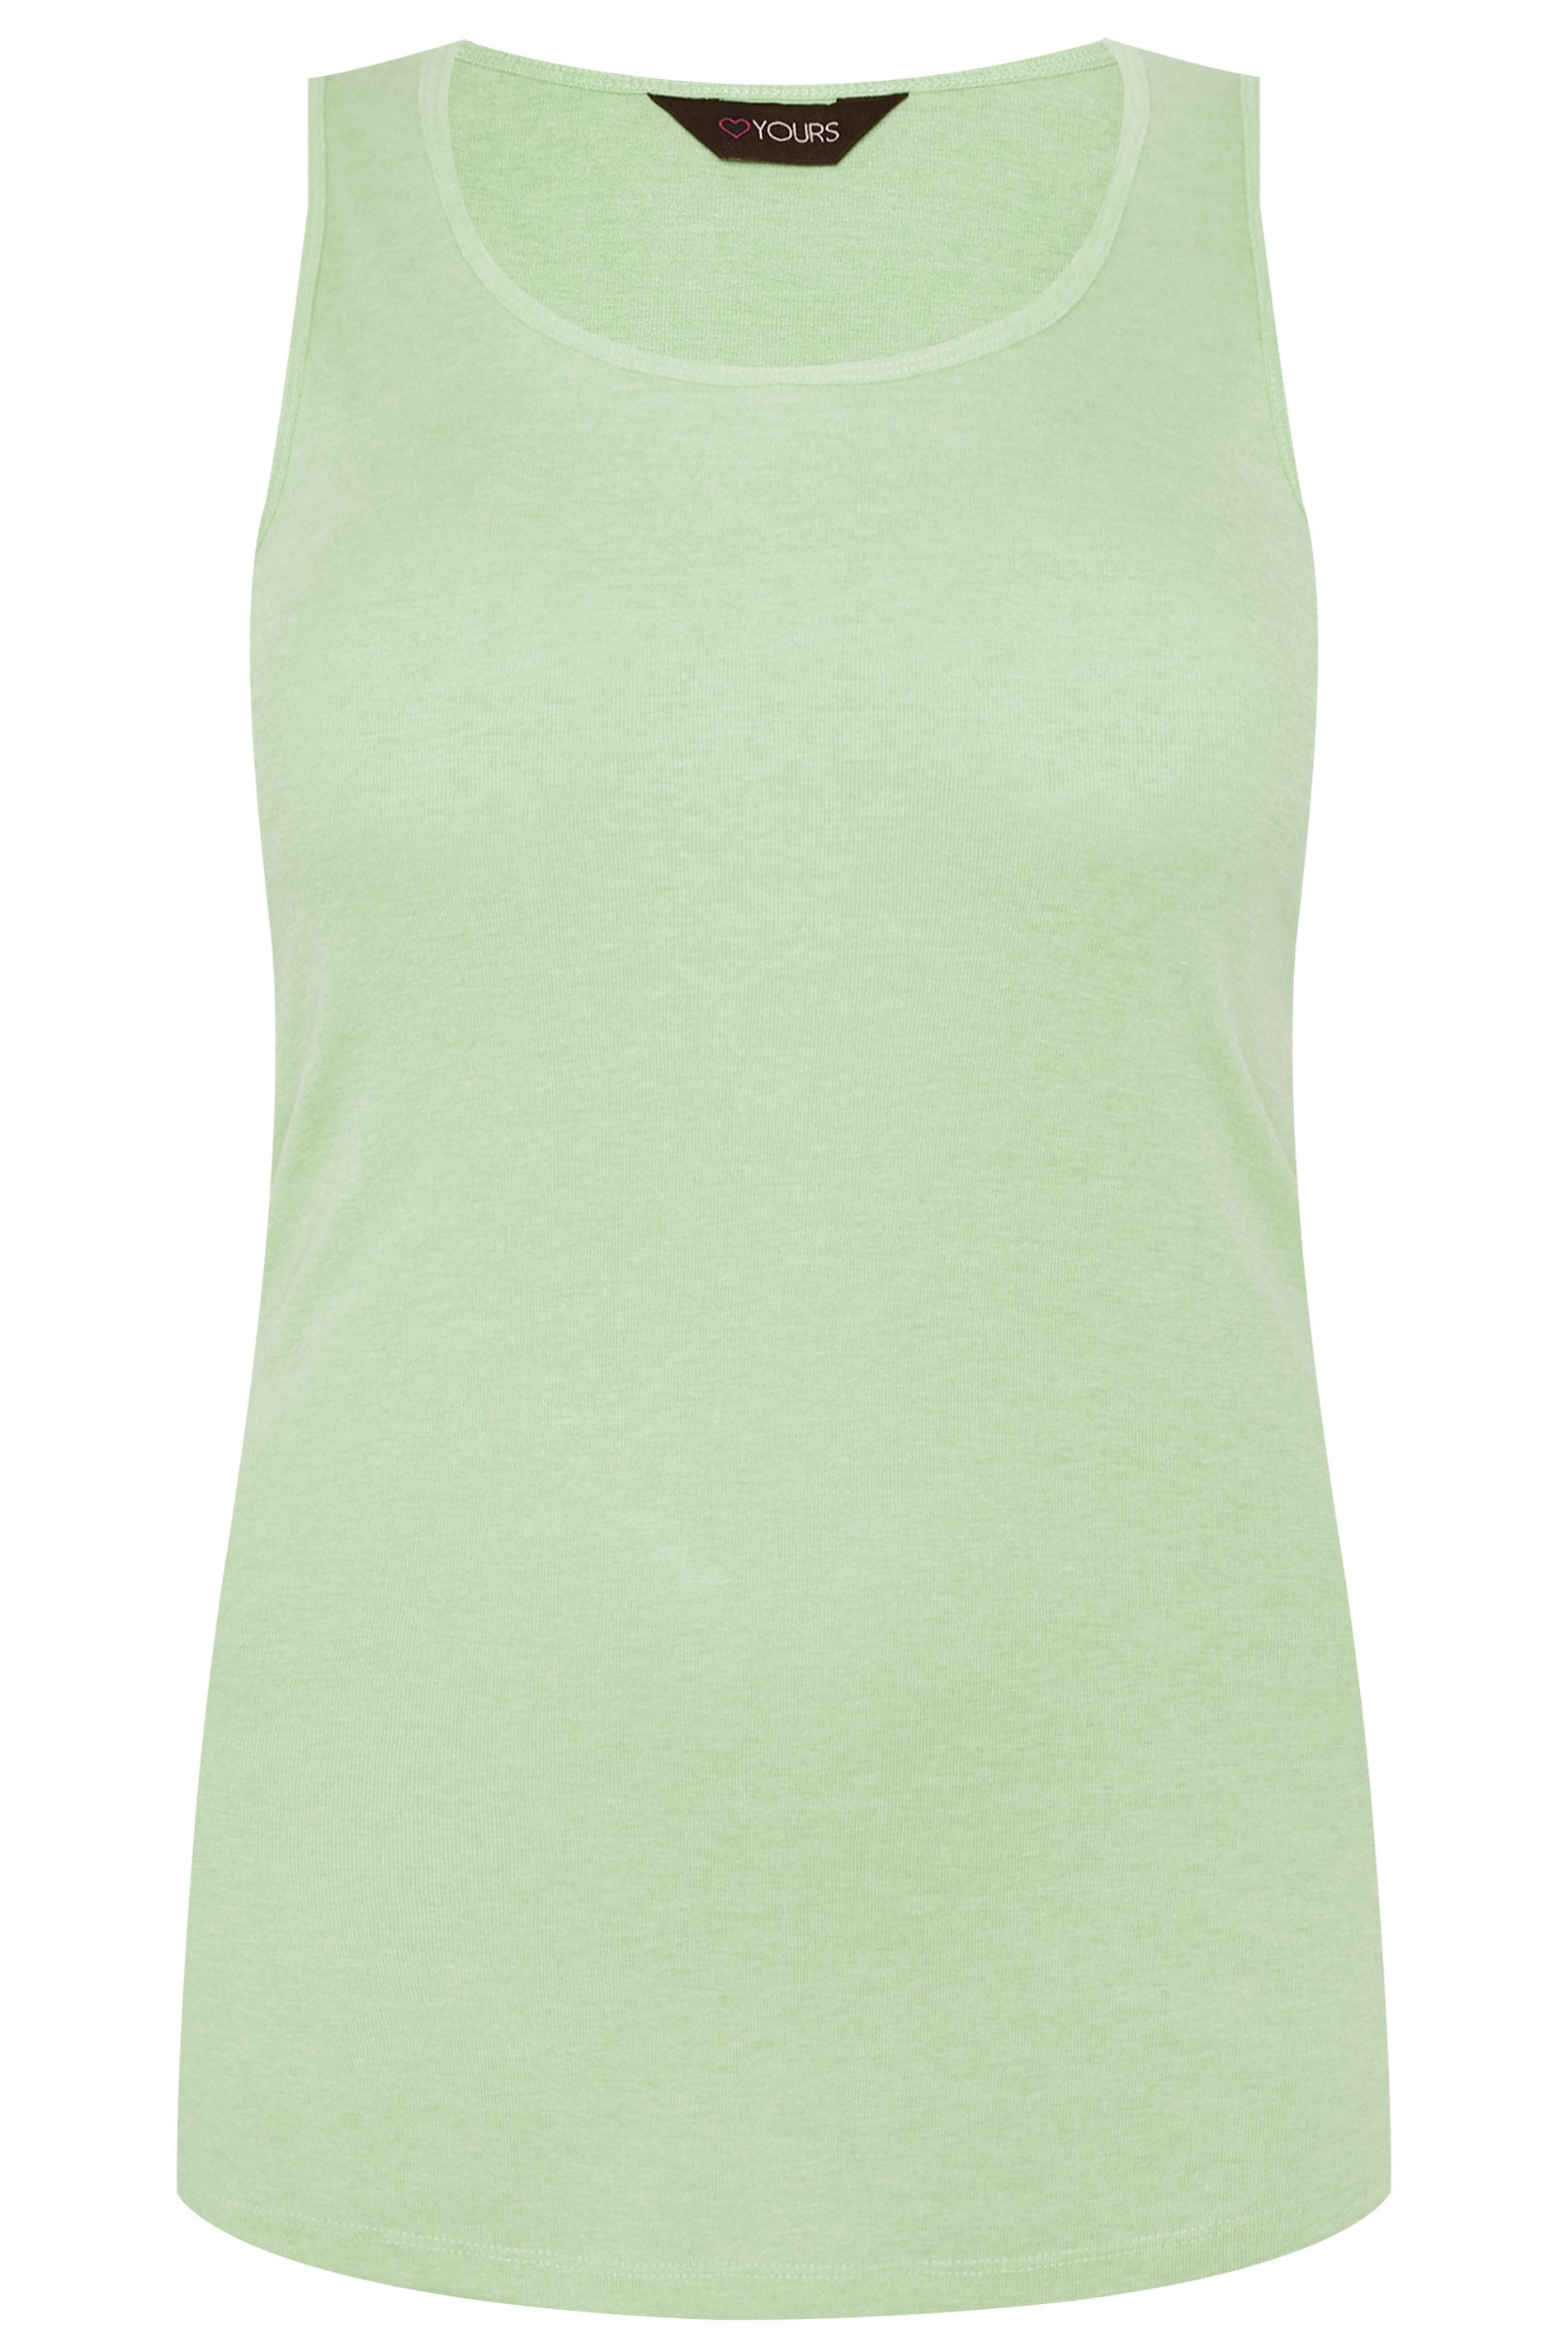 Sage Green Vest Top | Sizes 16 to 36 | Yours Clothing